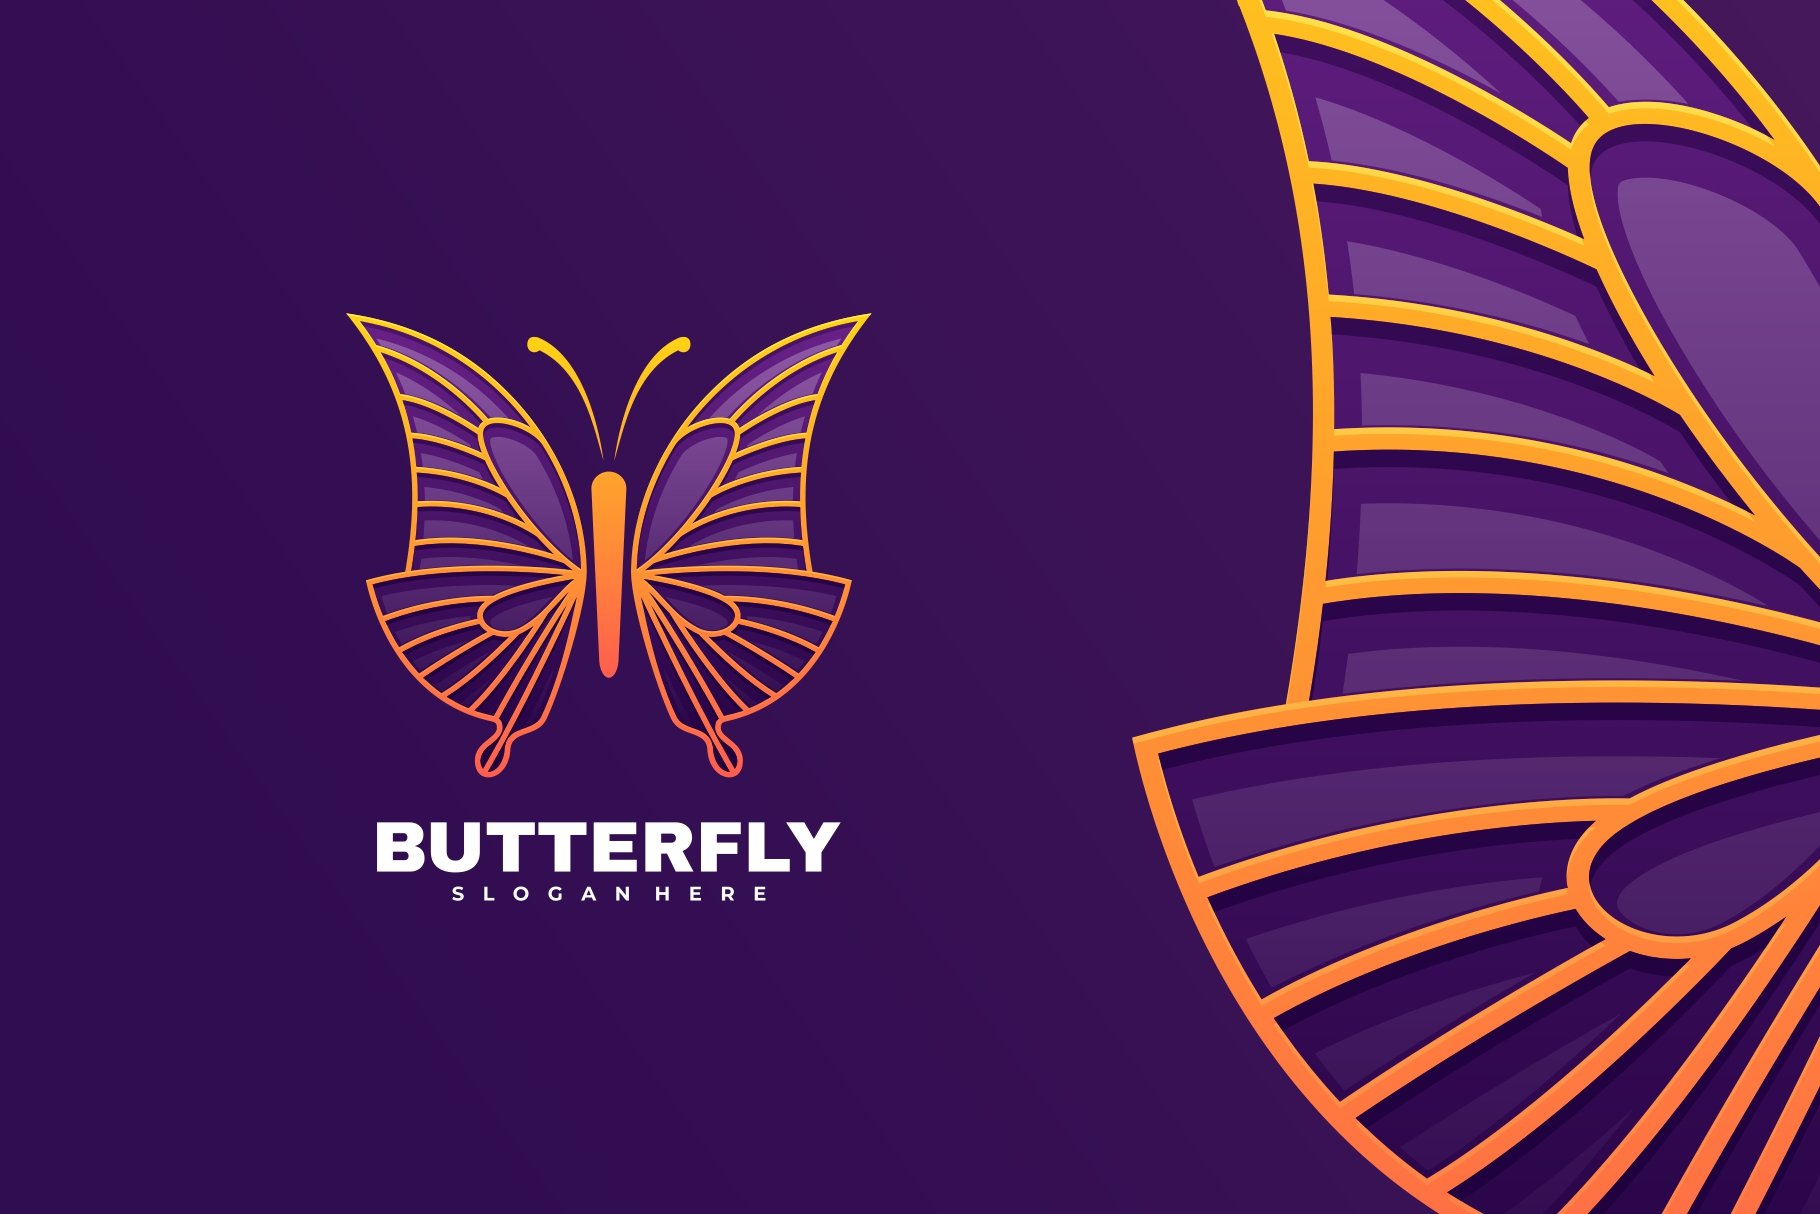 Butterfly Line Art Gradient Logo cover image.